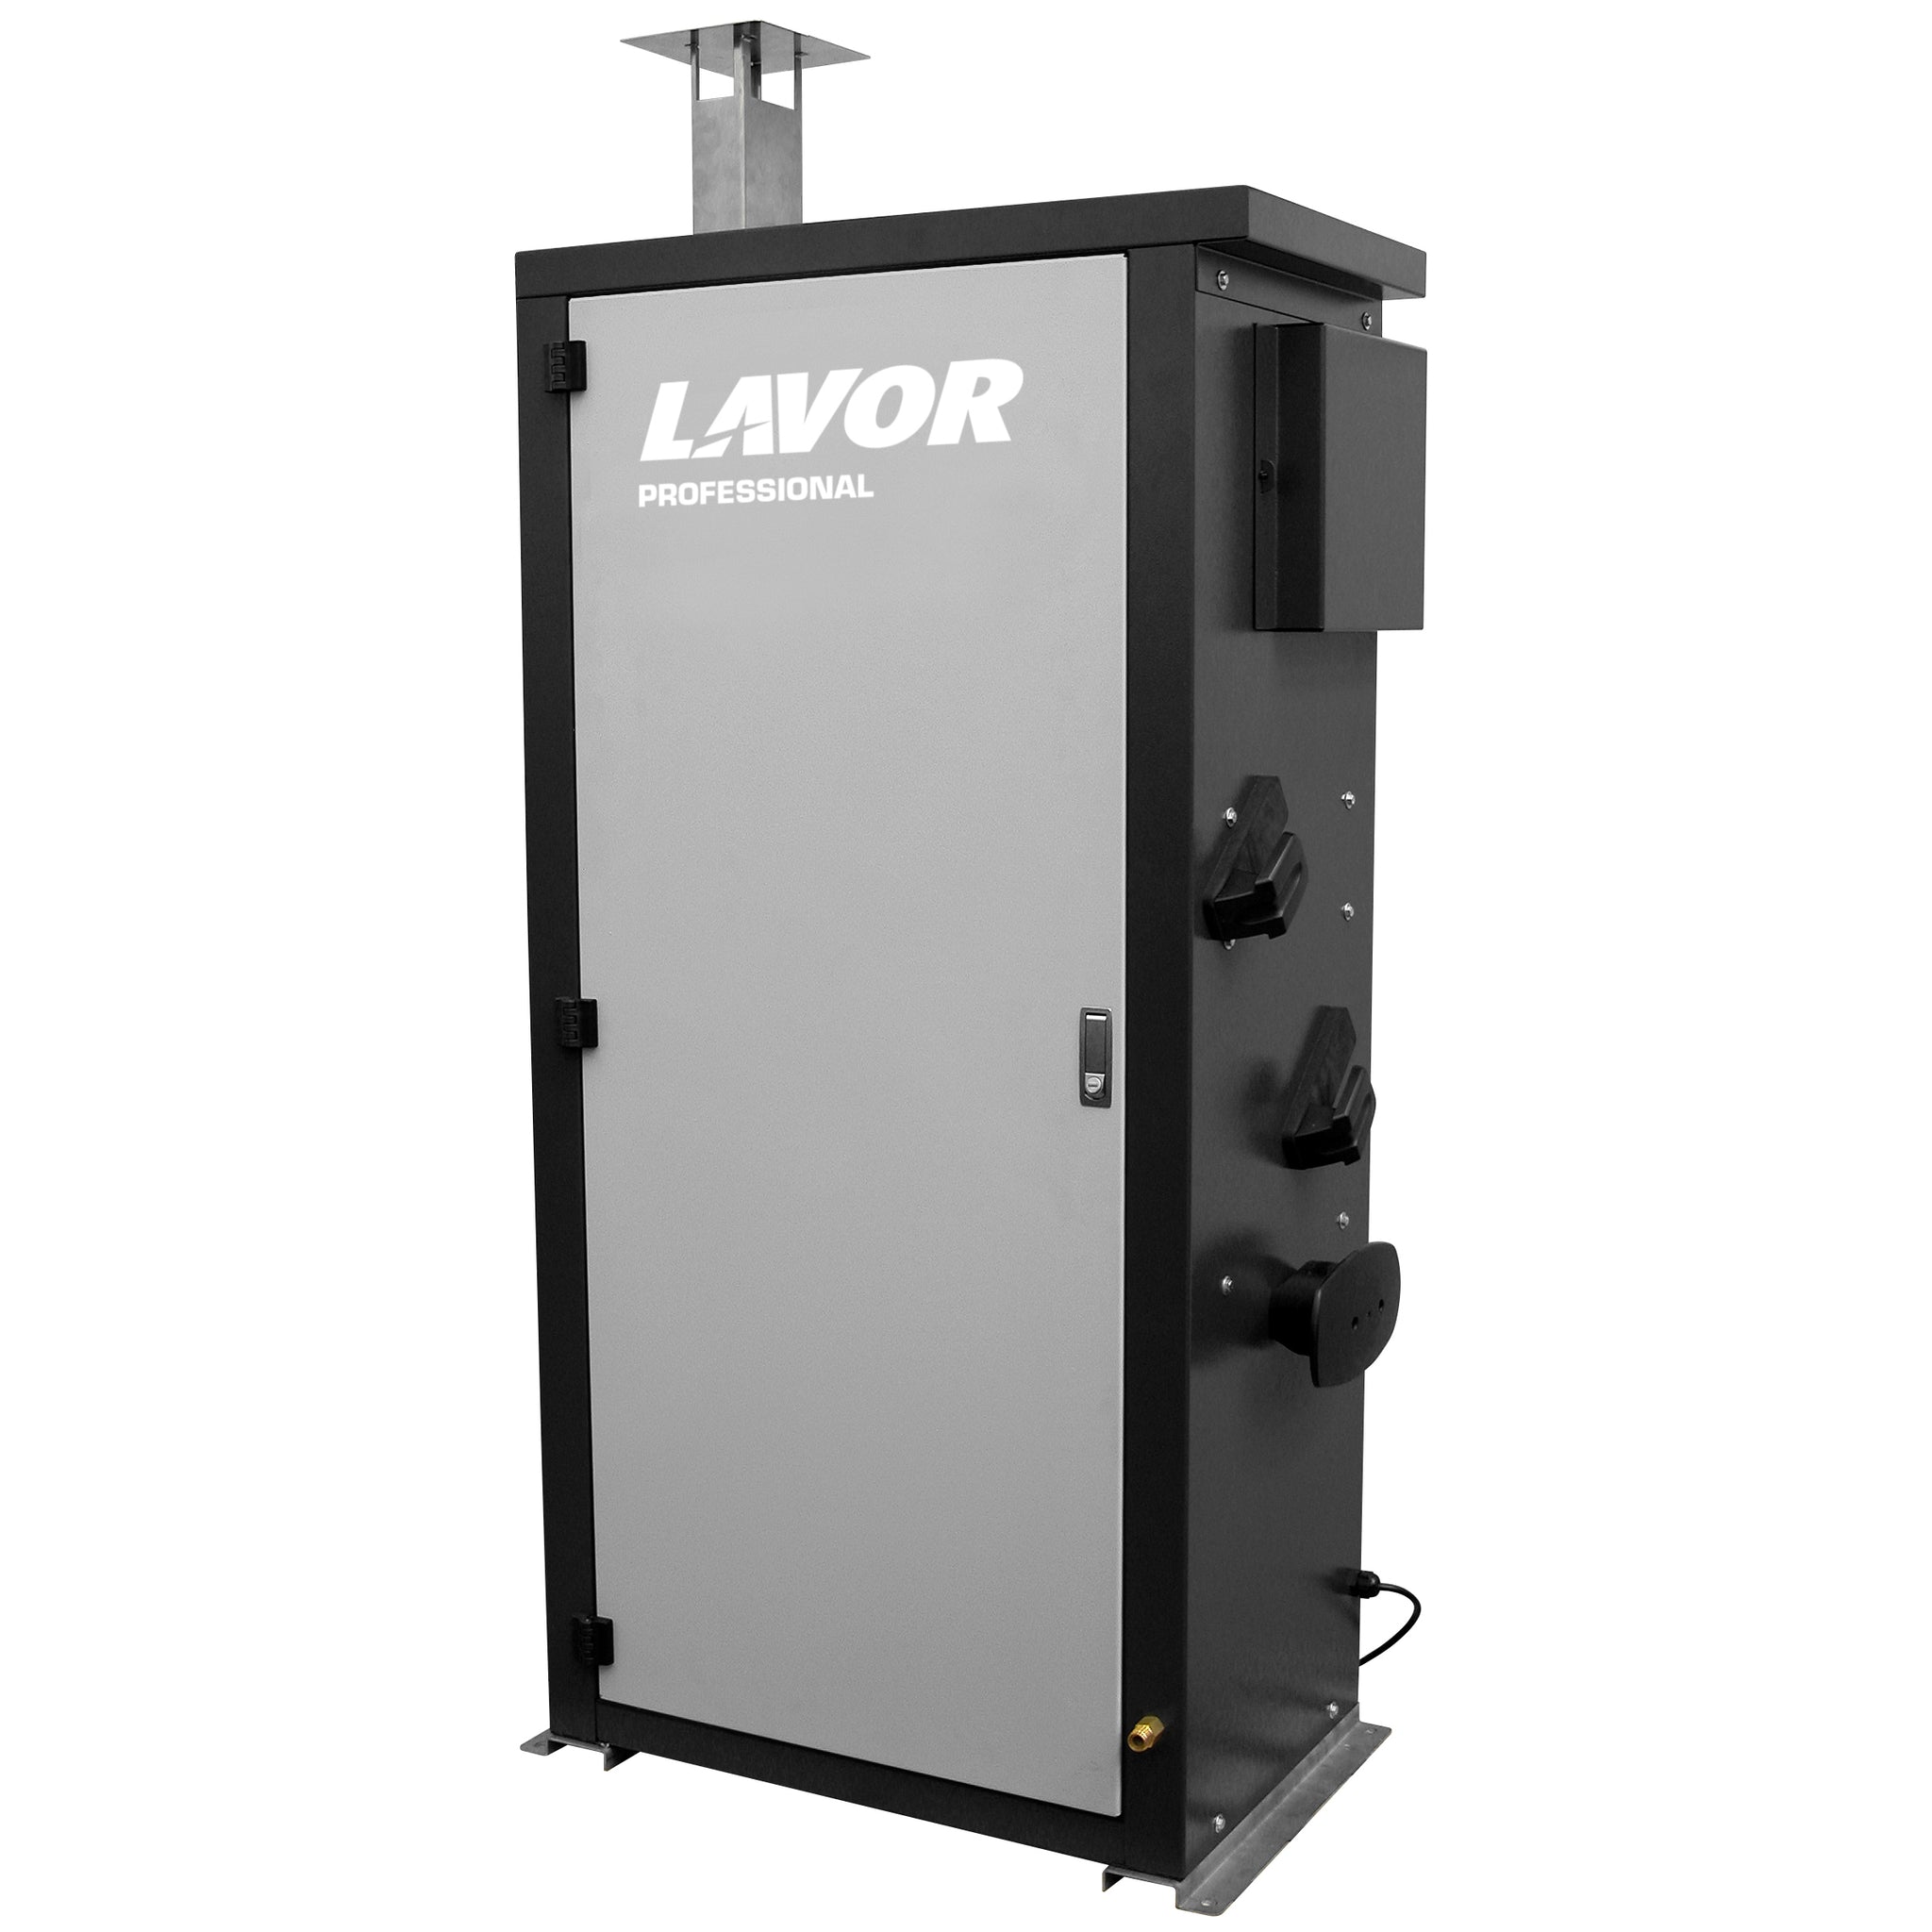 Lavor HHPV 2021 LP RA Hot Water Pressure Washer (3 Phase) Equip2Clean